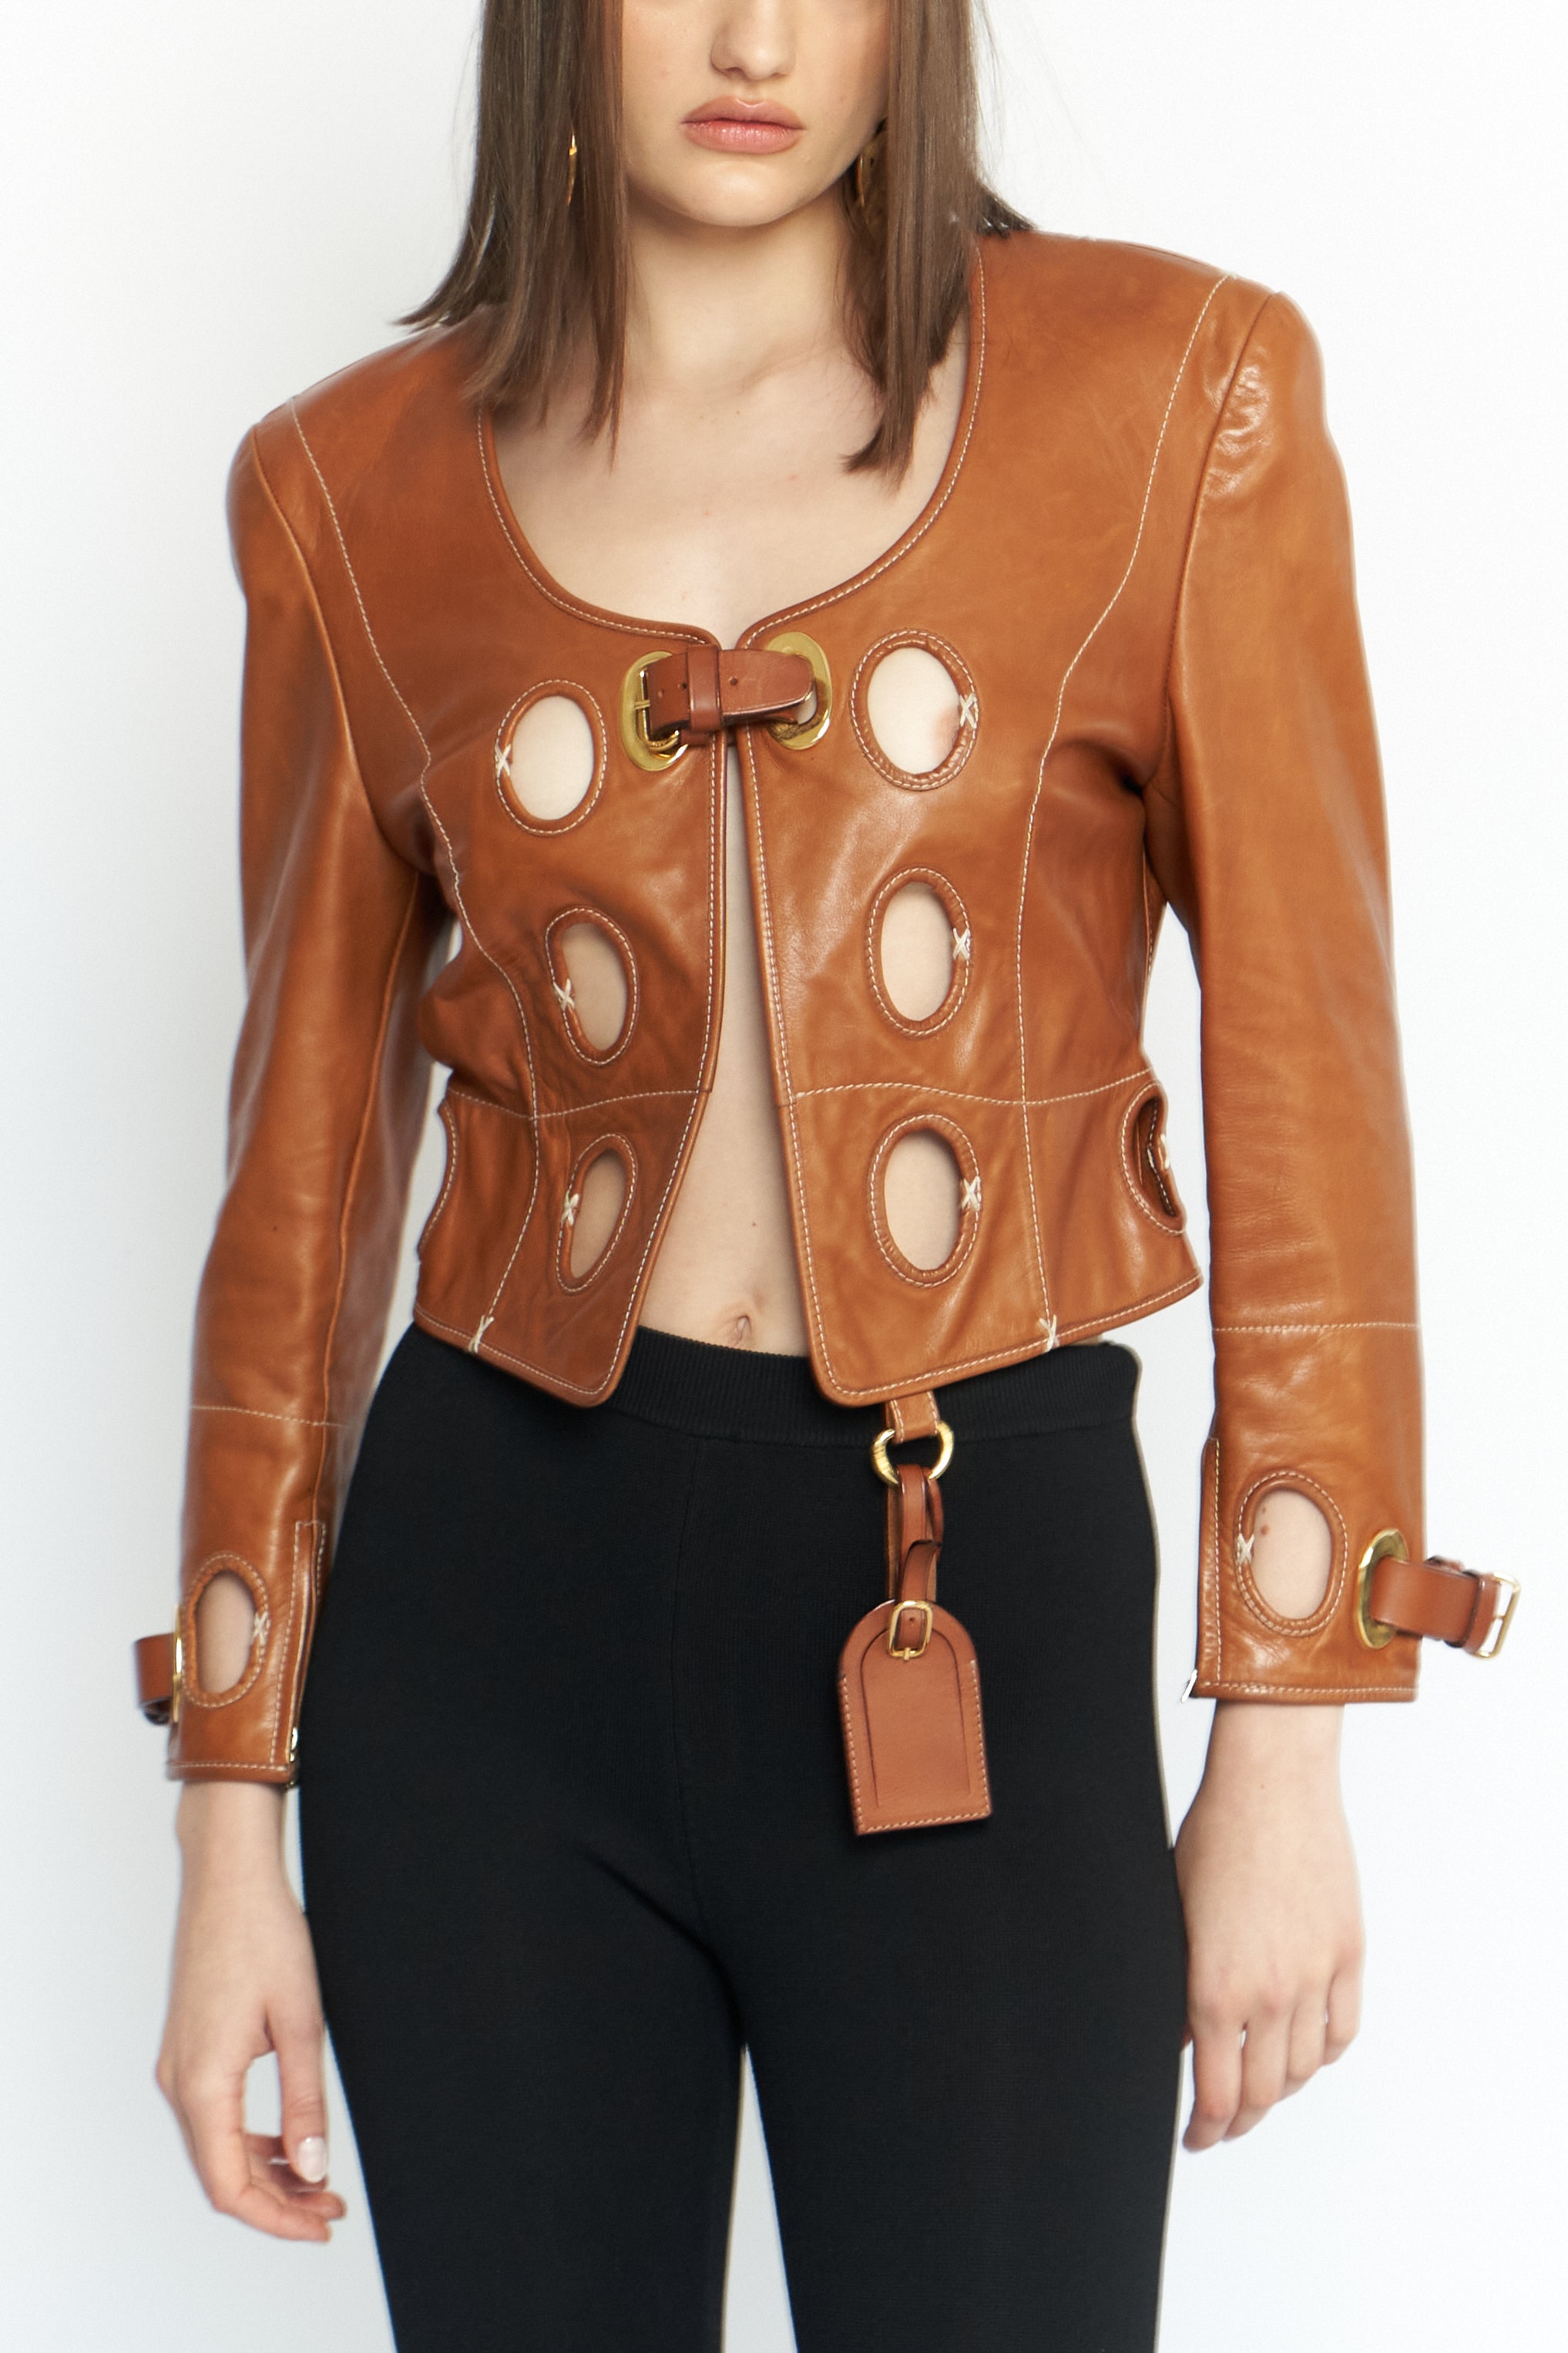 Gianfranco Ferre <br> S/S 1990 runway cut-out leather jacket